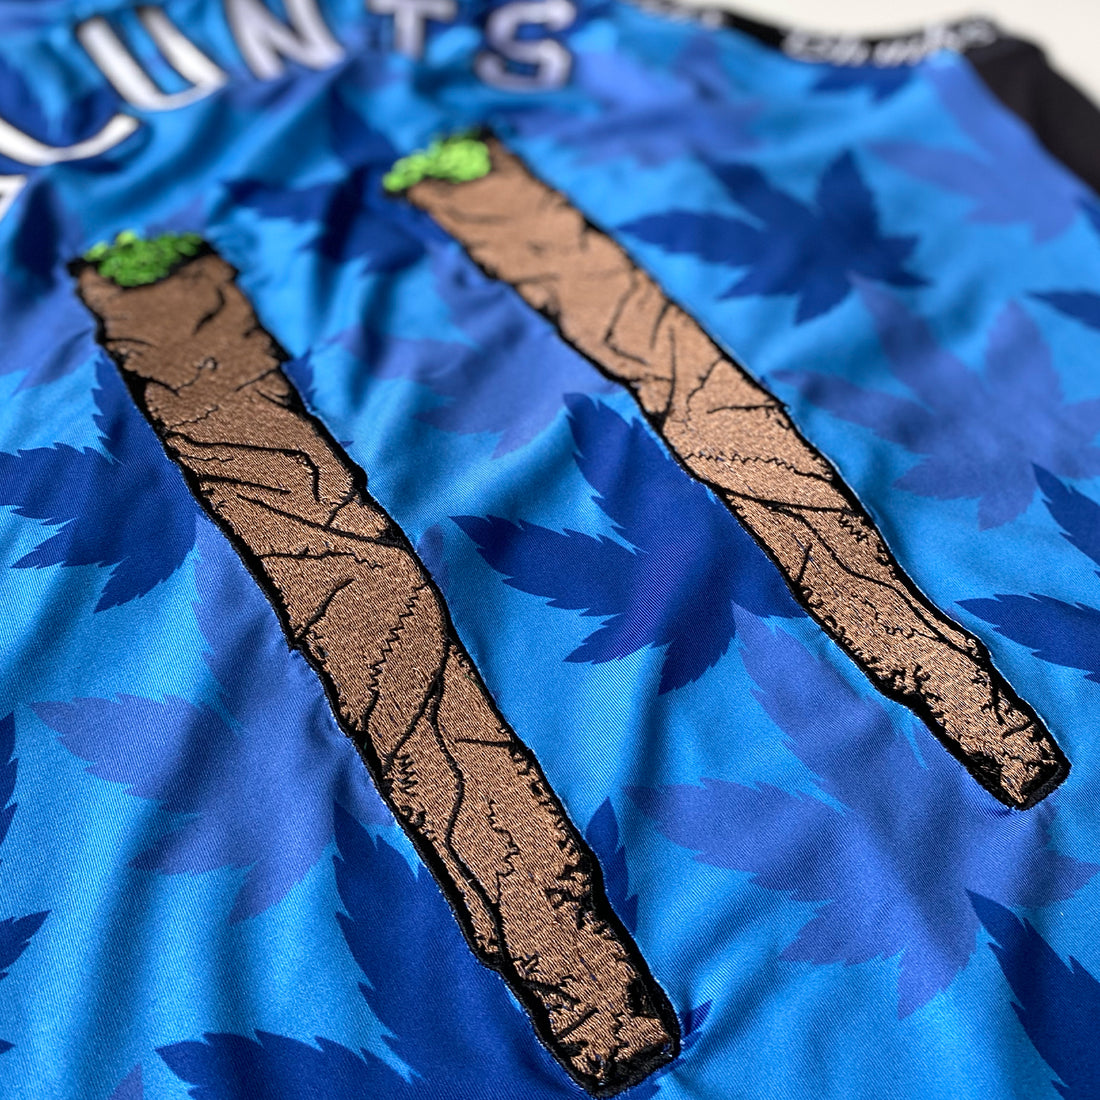 Blunts and Blondes - Custom Basketball Jersey